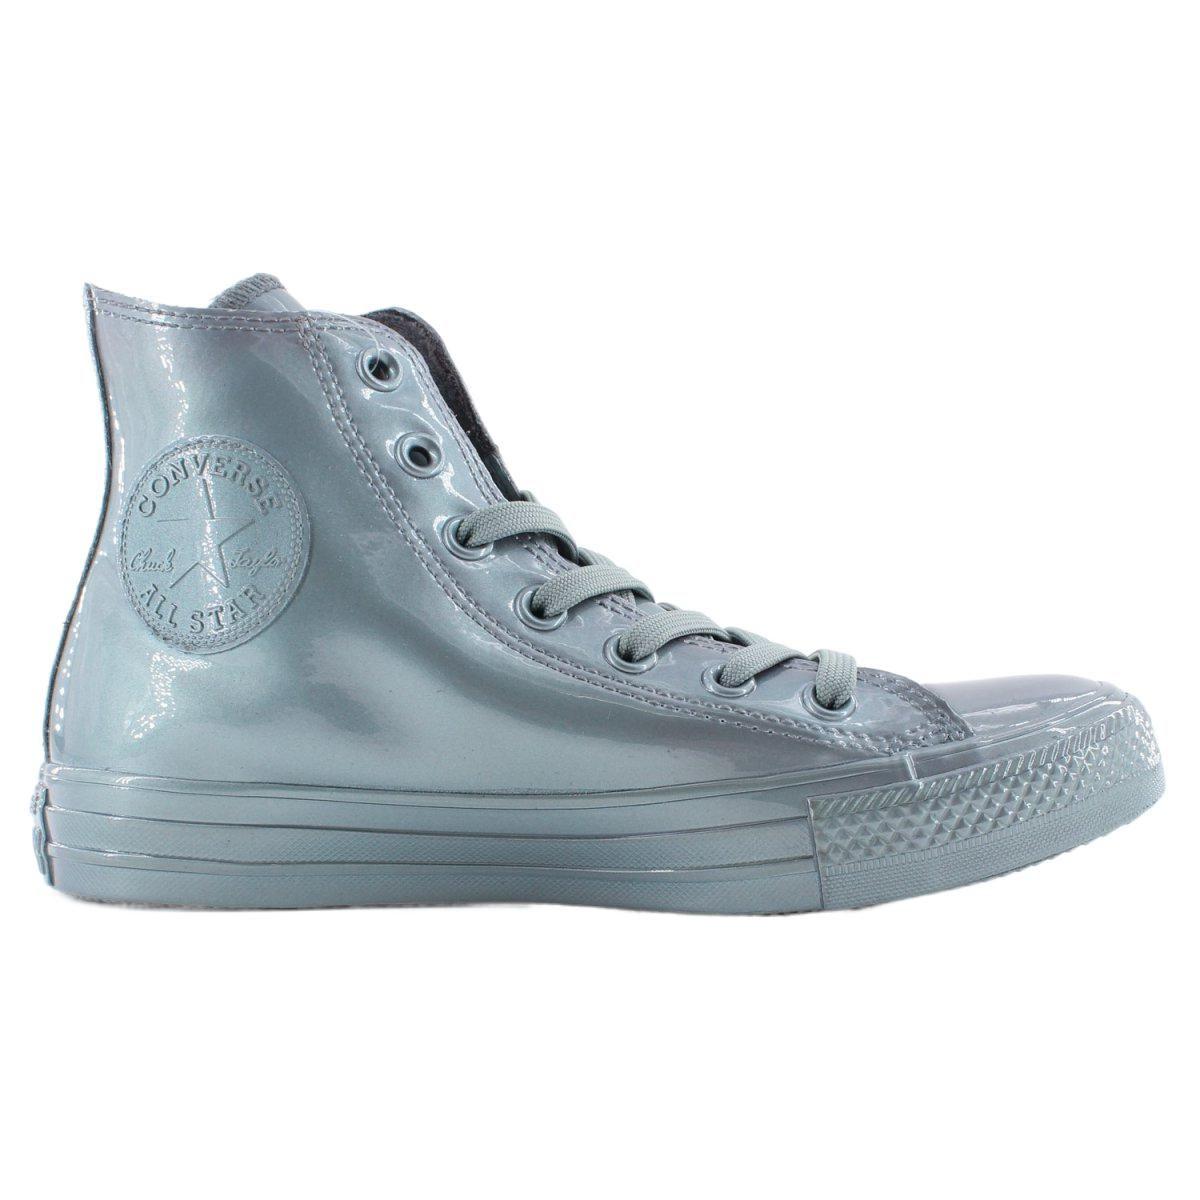 Converse Rubber Sneakers in Silver (Metallic) - Save 47% | Lyst